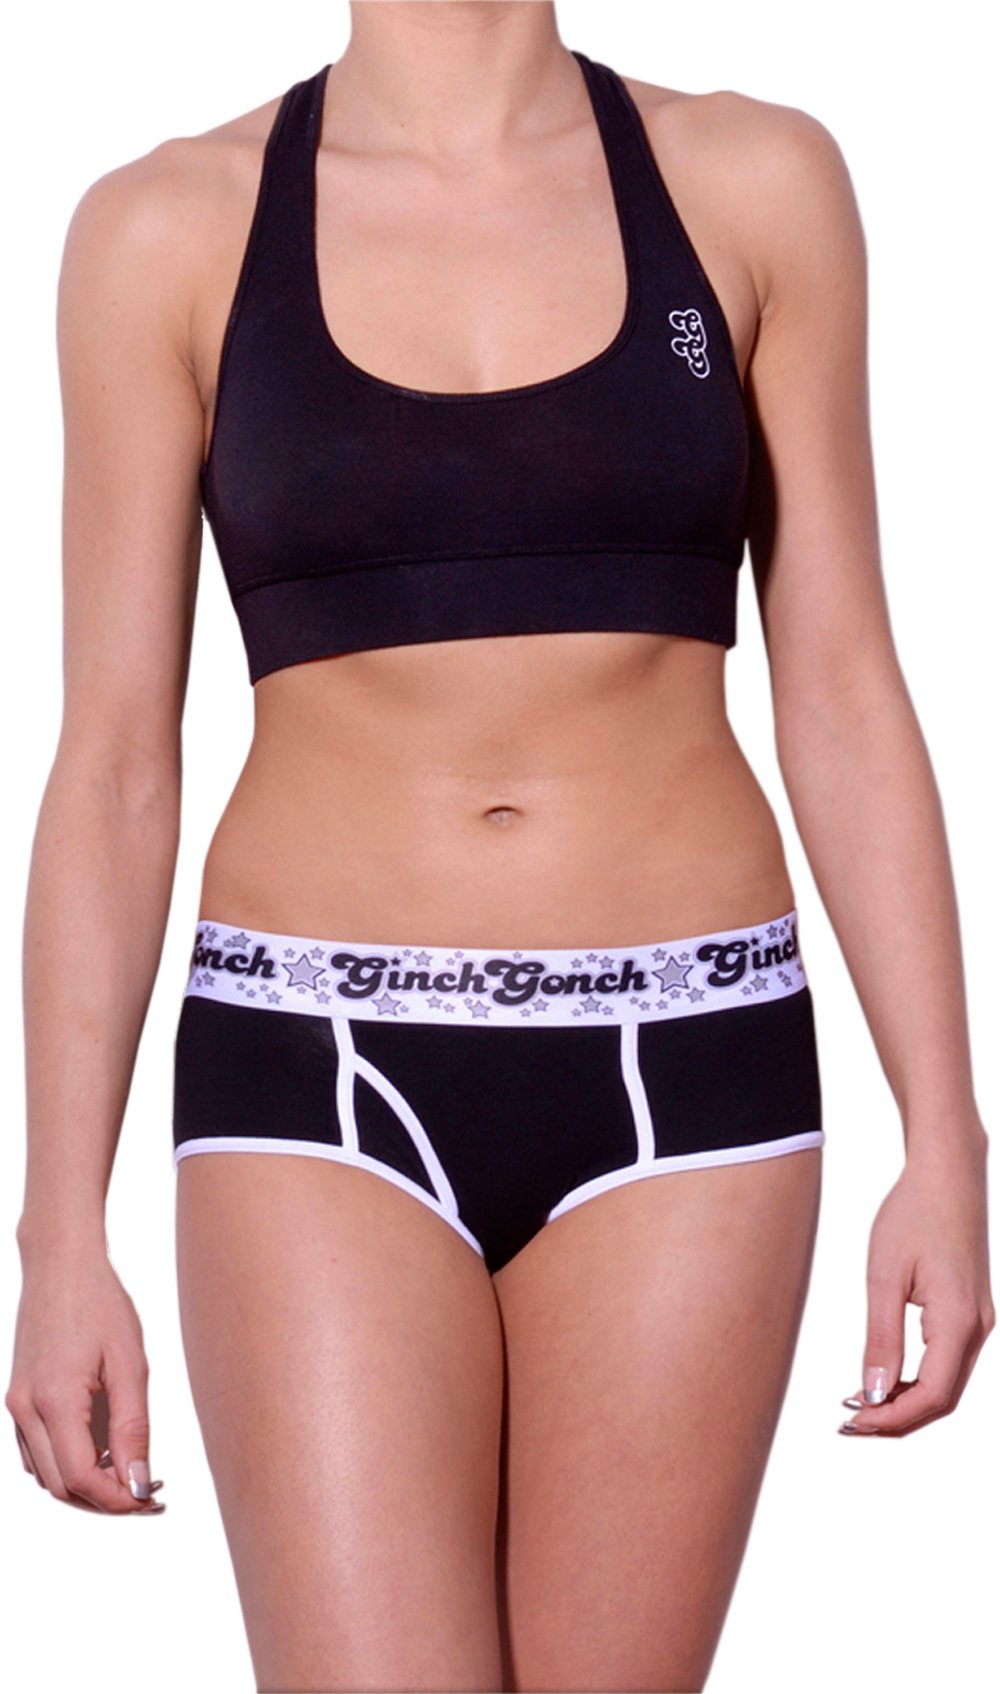 Ginch Gonch Black Magic Brief - Women's Underwear black jockey y front with white trim and printed waistband front